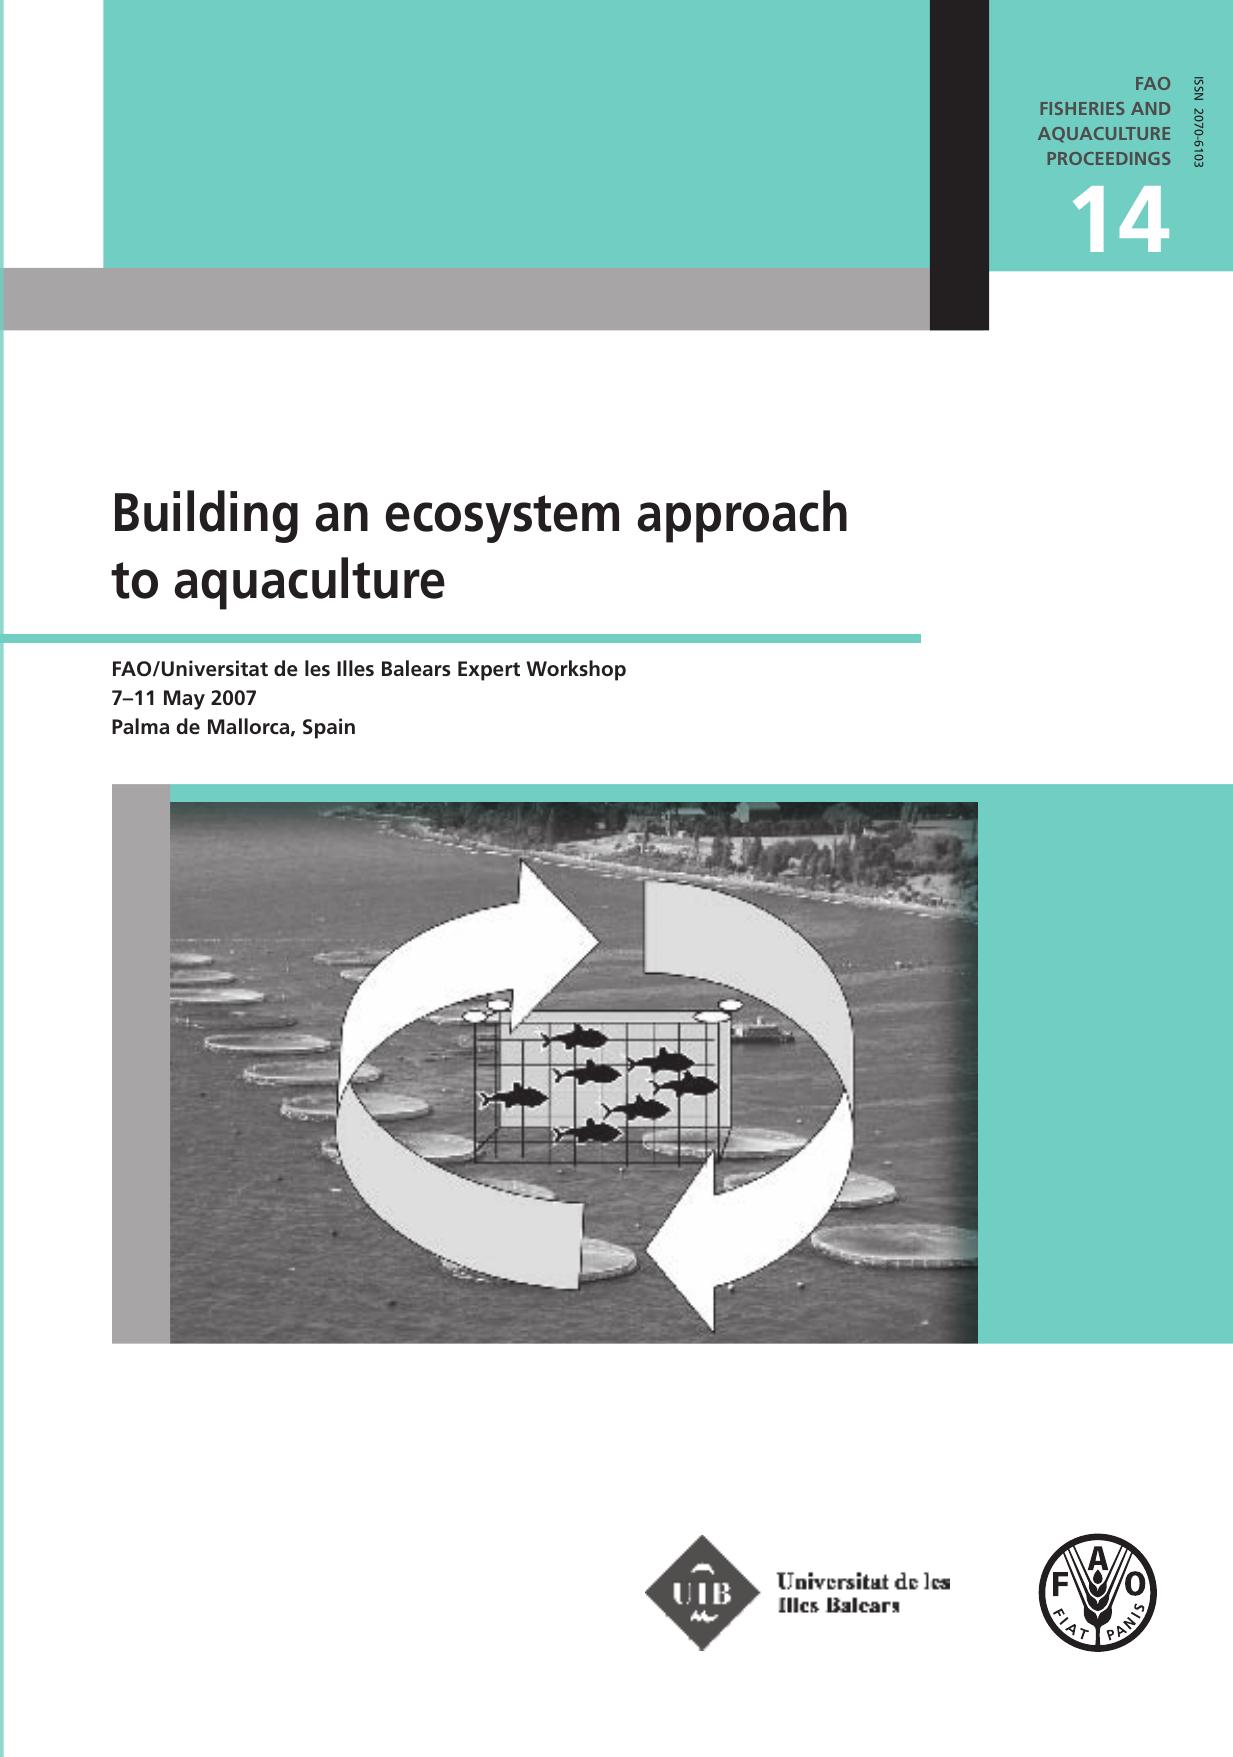 Building an ecosystem approach to aquaculture 2008